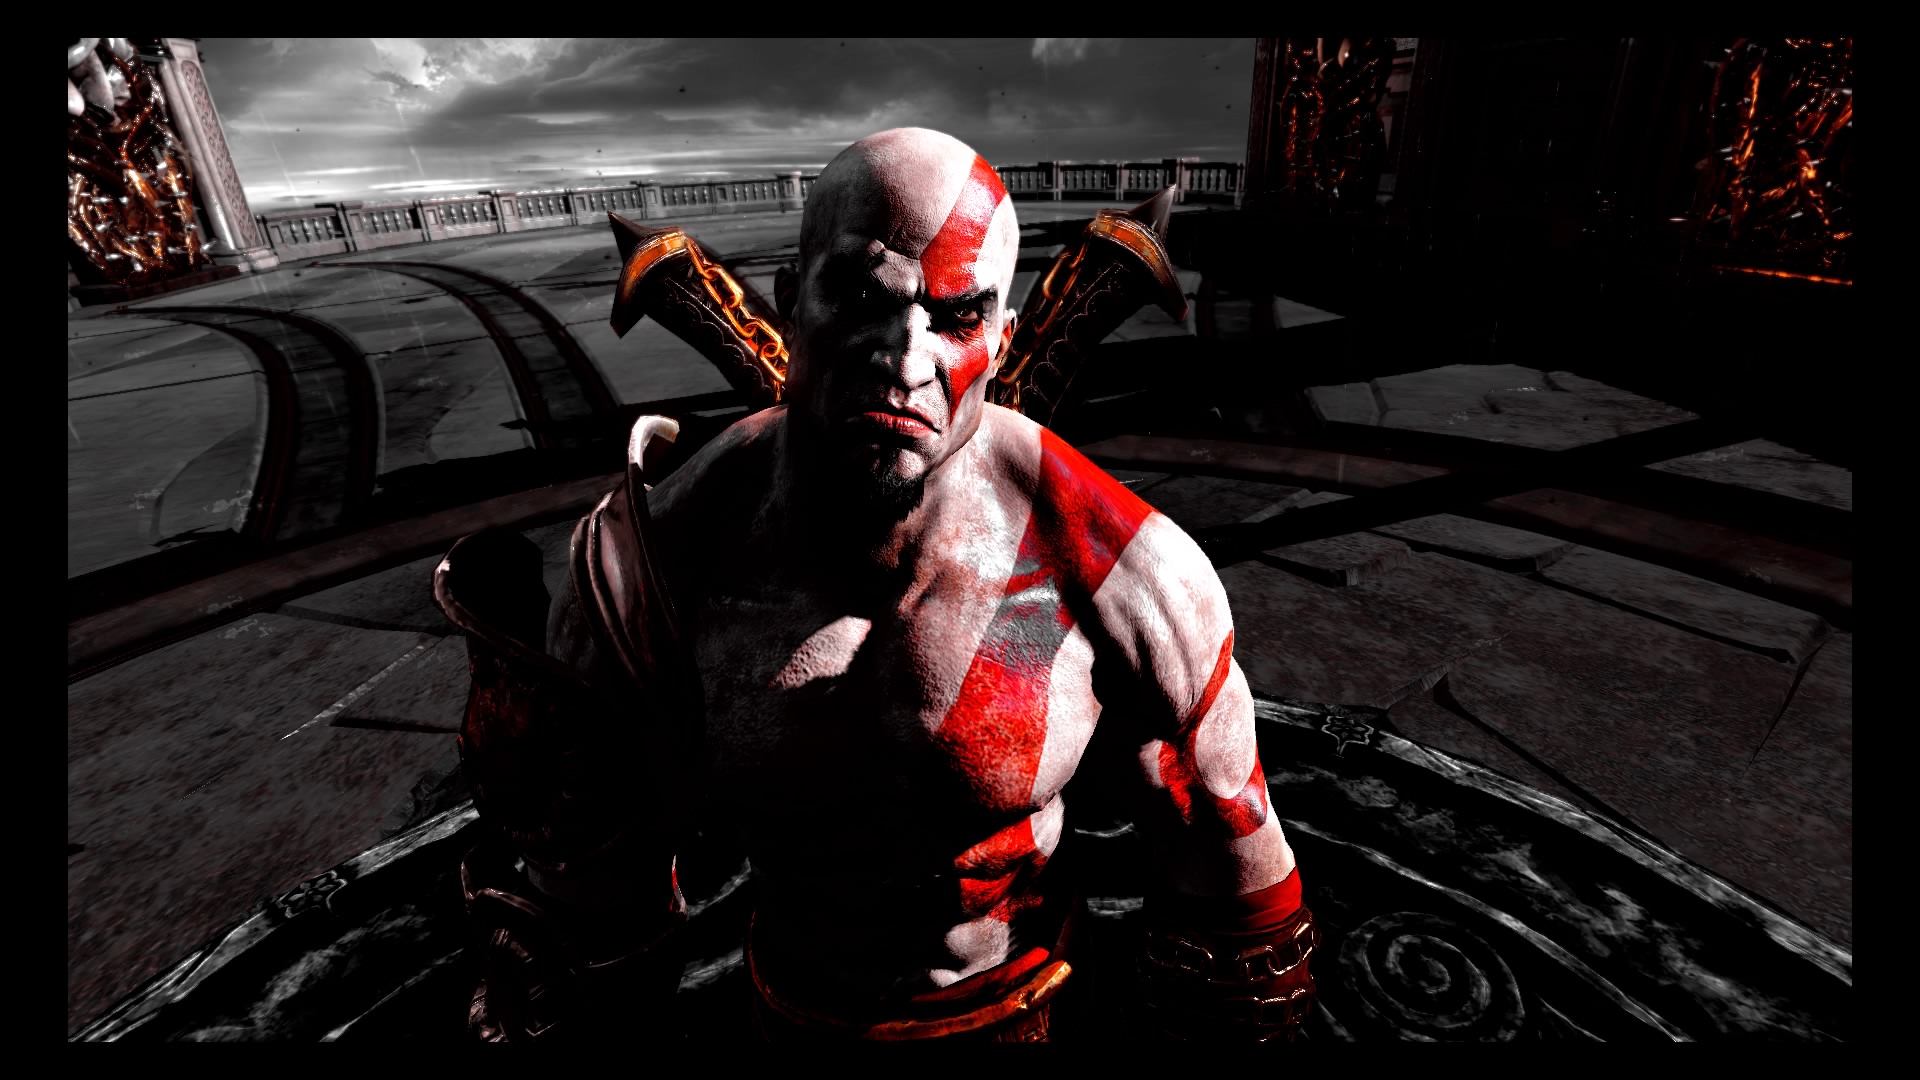 General 1920x1080 God of War III God of War PlayStation PlayStation 4 PlayStation Share Kratos screen shot video games video game characters